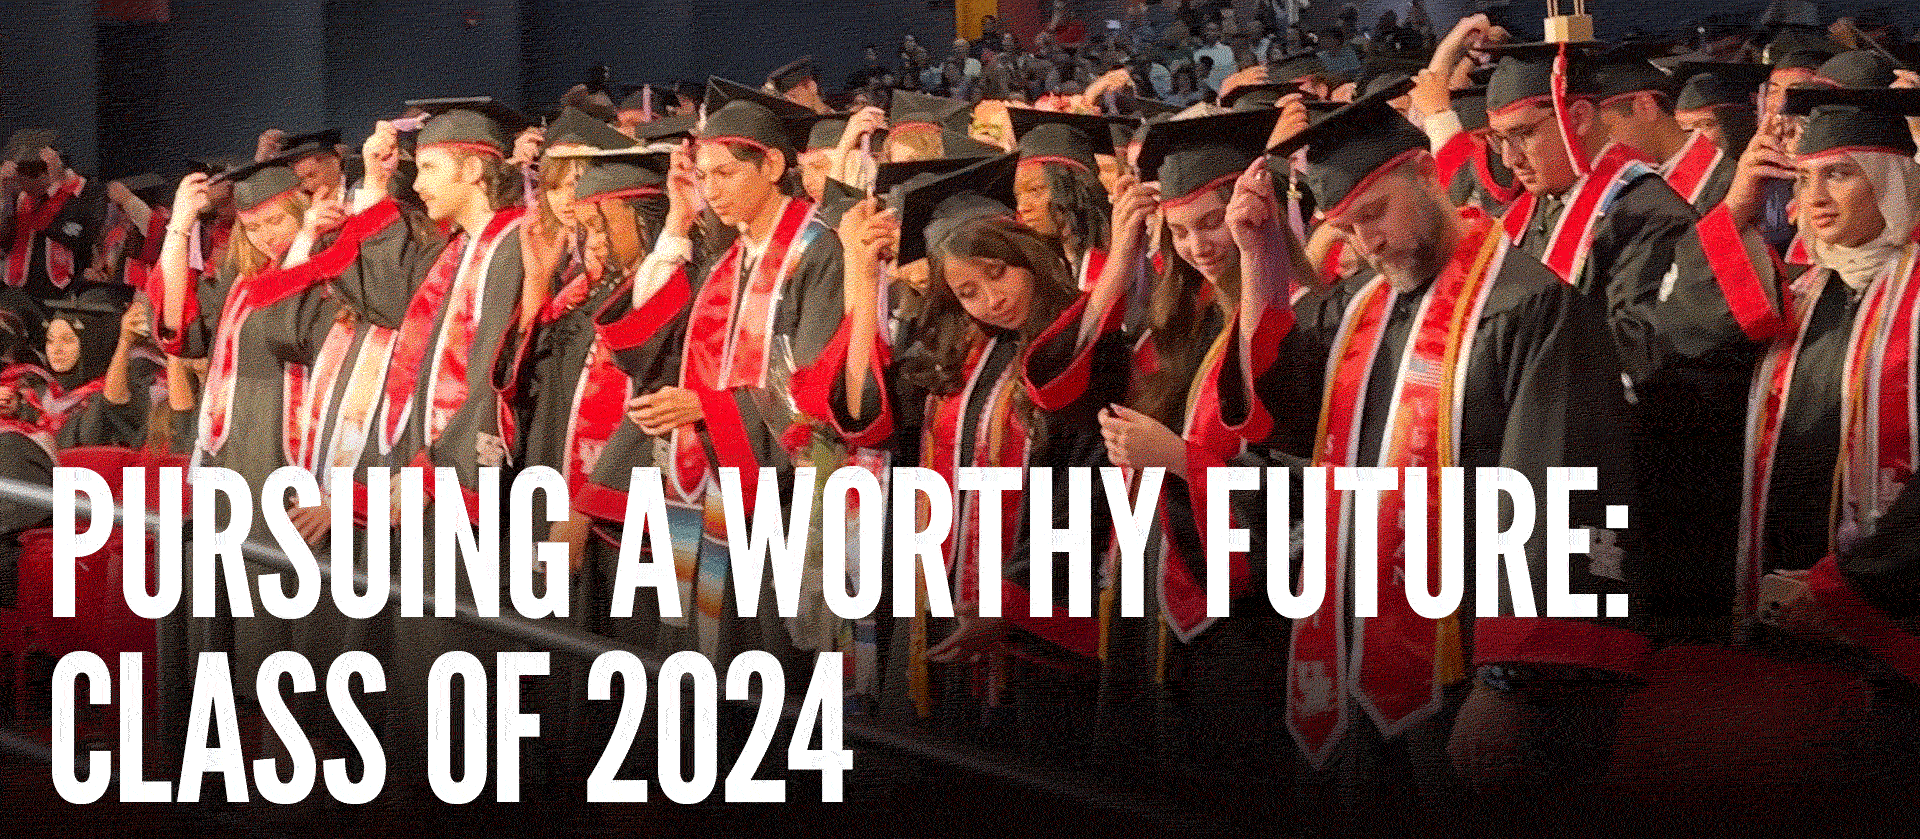 Pursuing a Worthy Future: Class of 2024